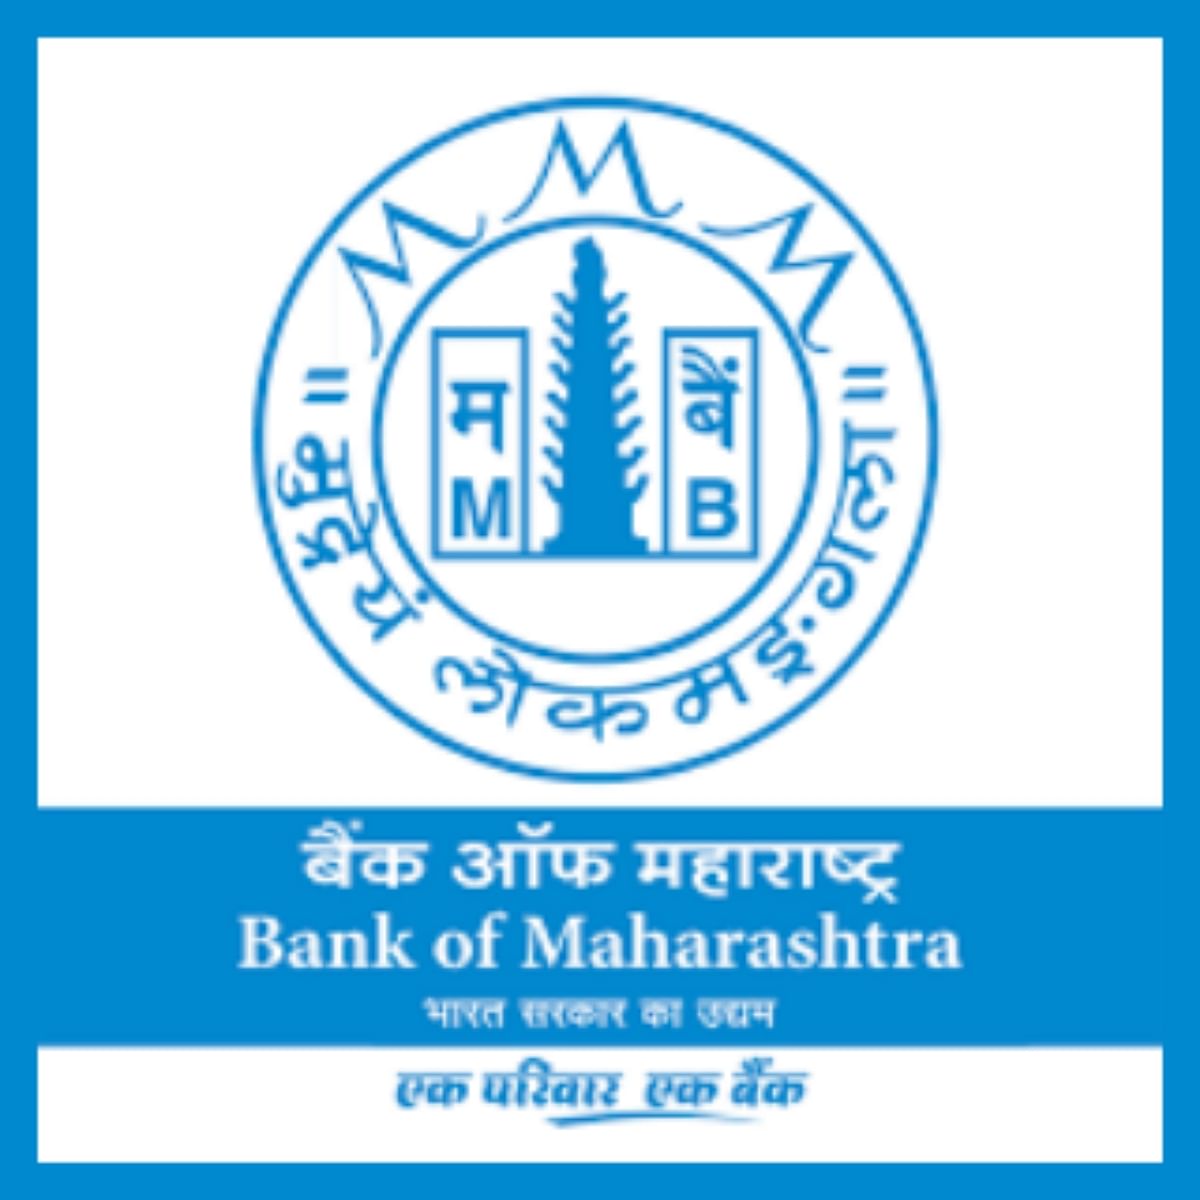 Bank of Maharashtra Generalist Officer Admit Card 2021 Released, Direct Link Here